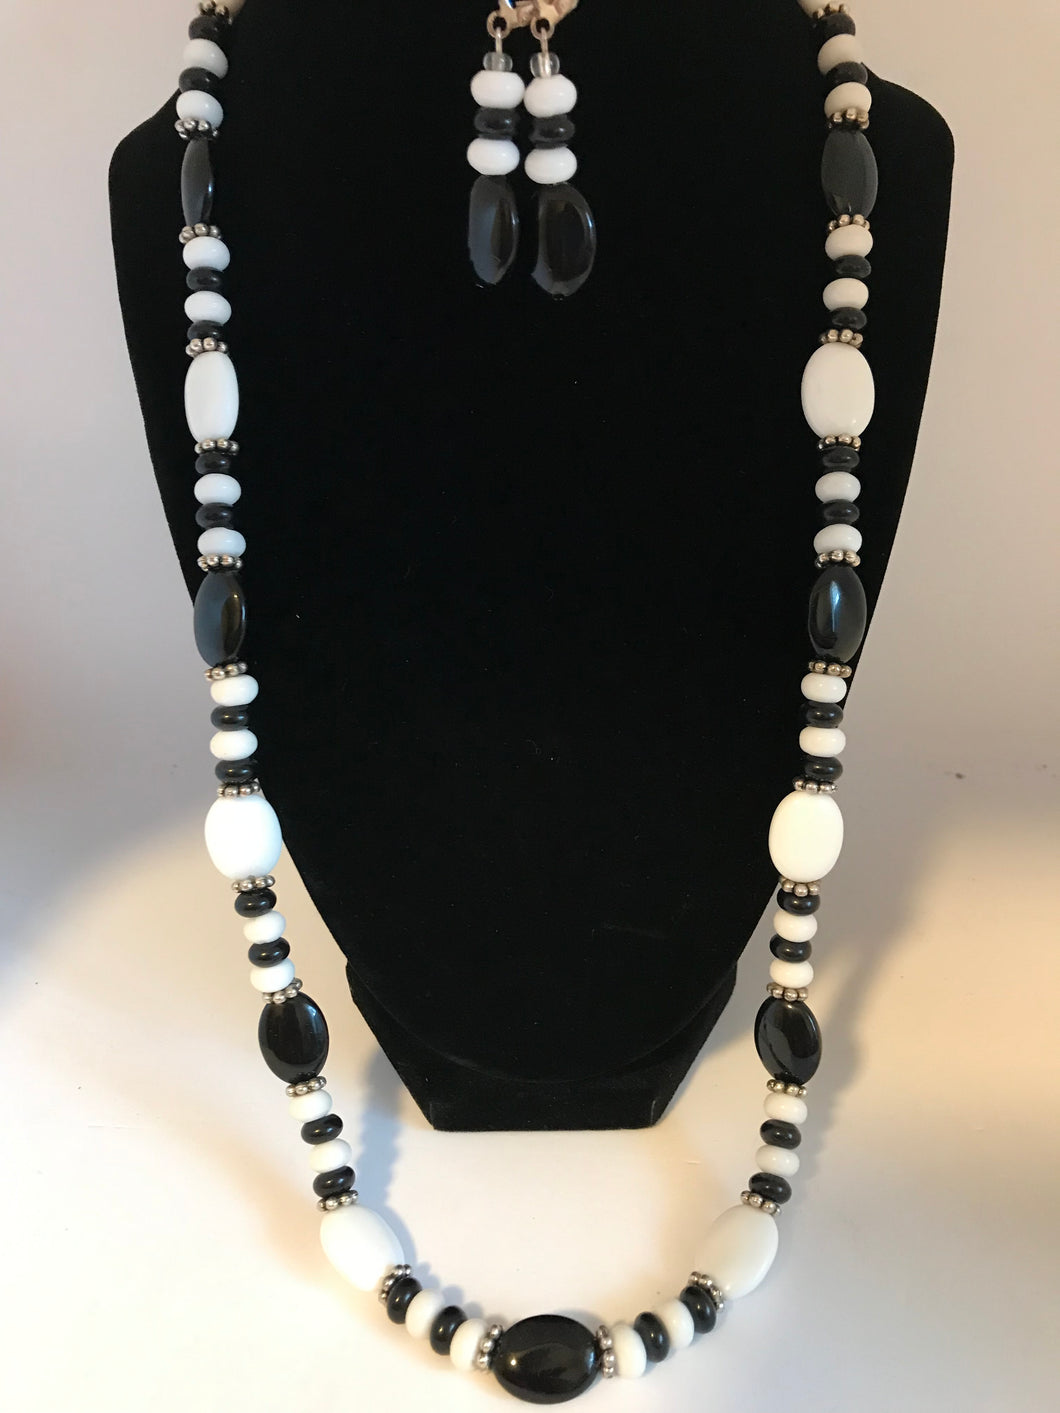 Black and white long necklace with matching earrings